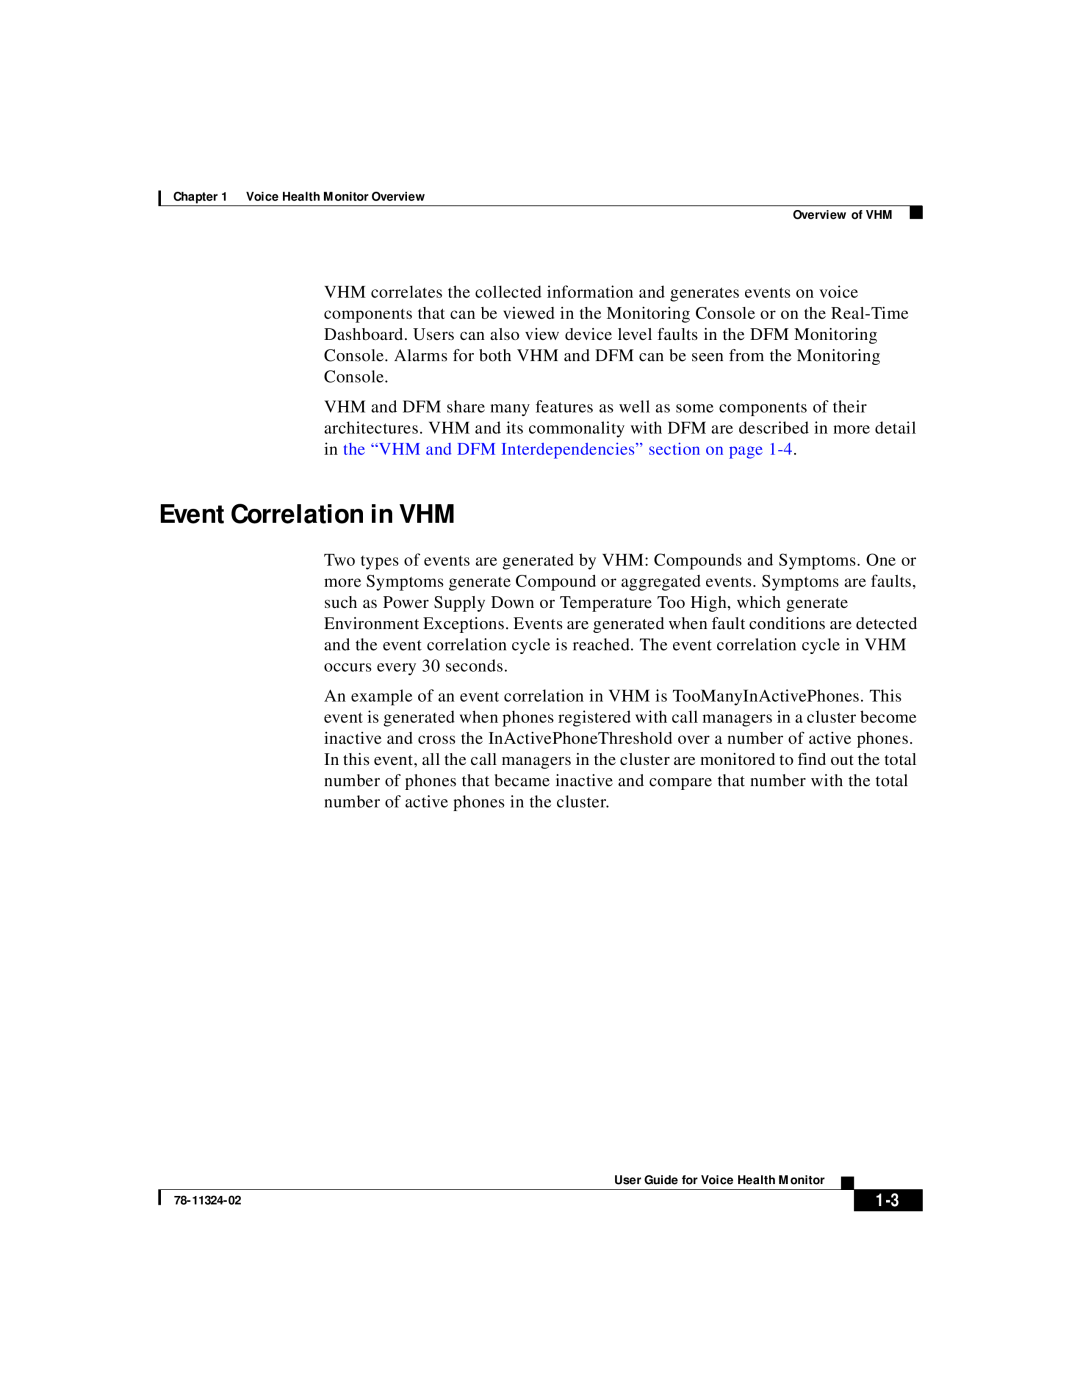 Cisco Systems 78-11324-02 manual Event Correlation in VHM 